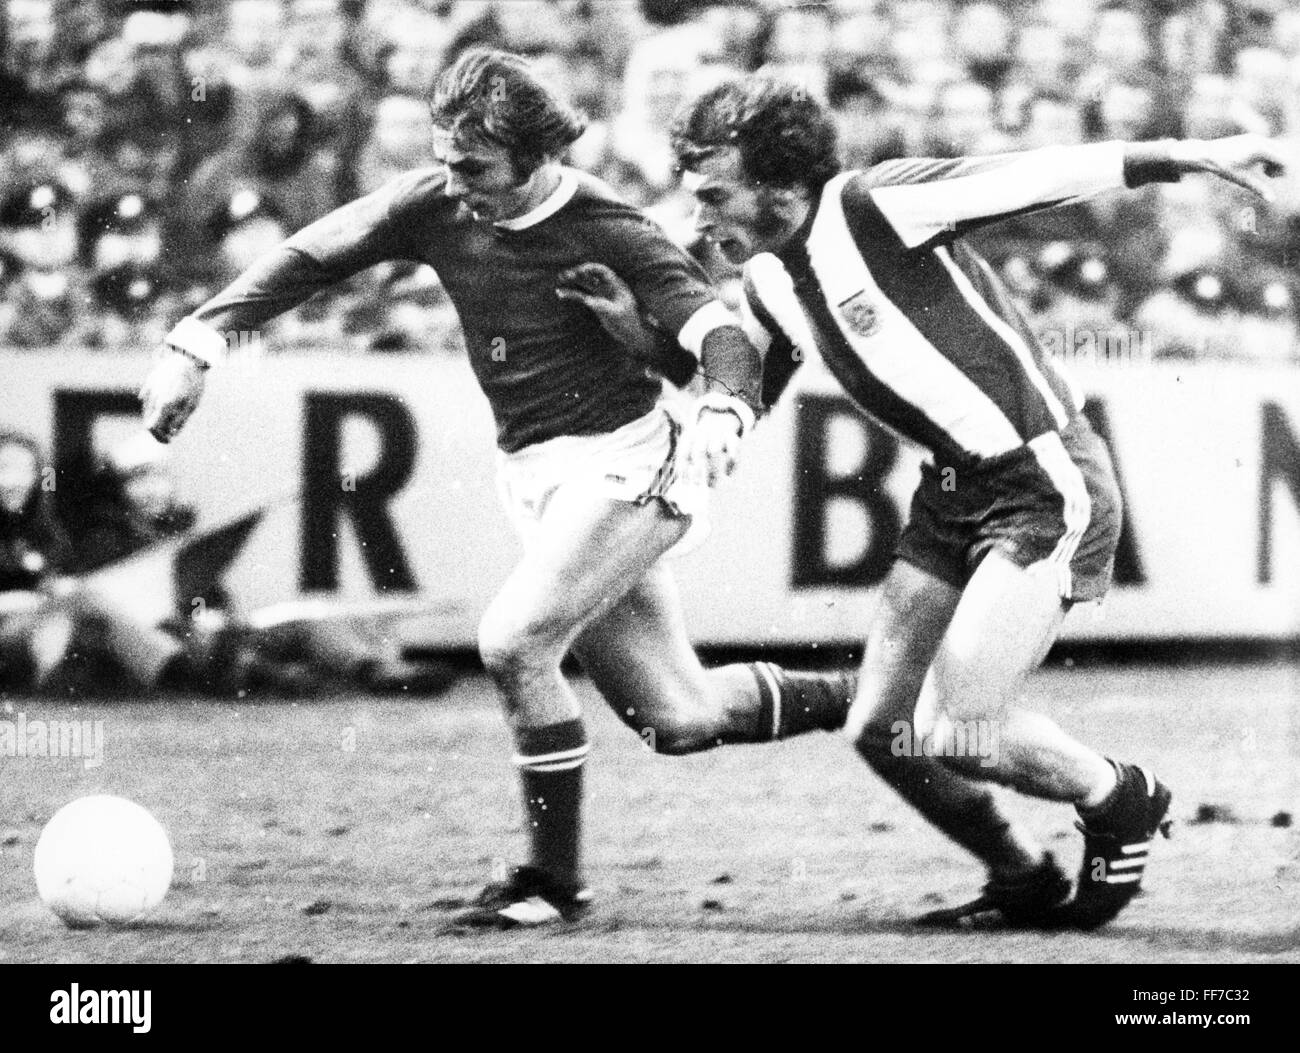 sports,football,games,Germany,national league,season 1971 / 1972,17th match day,game FC Schalke 04 versus Bayern Muenchen,Glückaufkampfbahn,Gelsenkirchen,11.12.1971,duel between Reinhard Libuda and Paul Breitner,football match,soccer match,football matches,footballer,footballers,kicker,football player,football players,player,players,athletes,athlete,action,act,actions,acts,attack,offensive move,attacks,offensive moves,ball,running,run,runs,abatis,arms,arm,physical,physical play,full length,Glueckauf-kampfbahn,Glückauf ,Additional-Rights-Clearences-Not Available Stock Photo